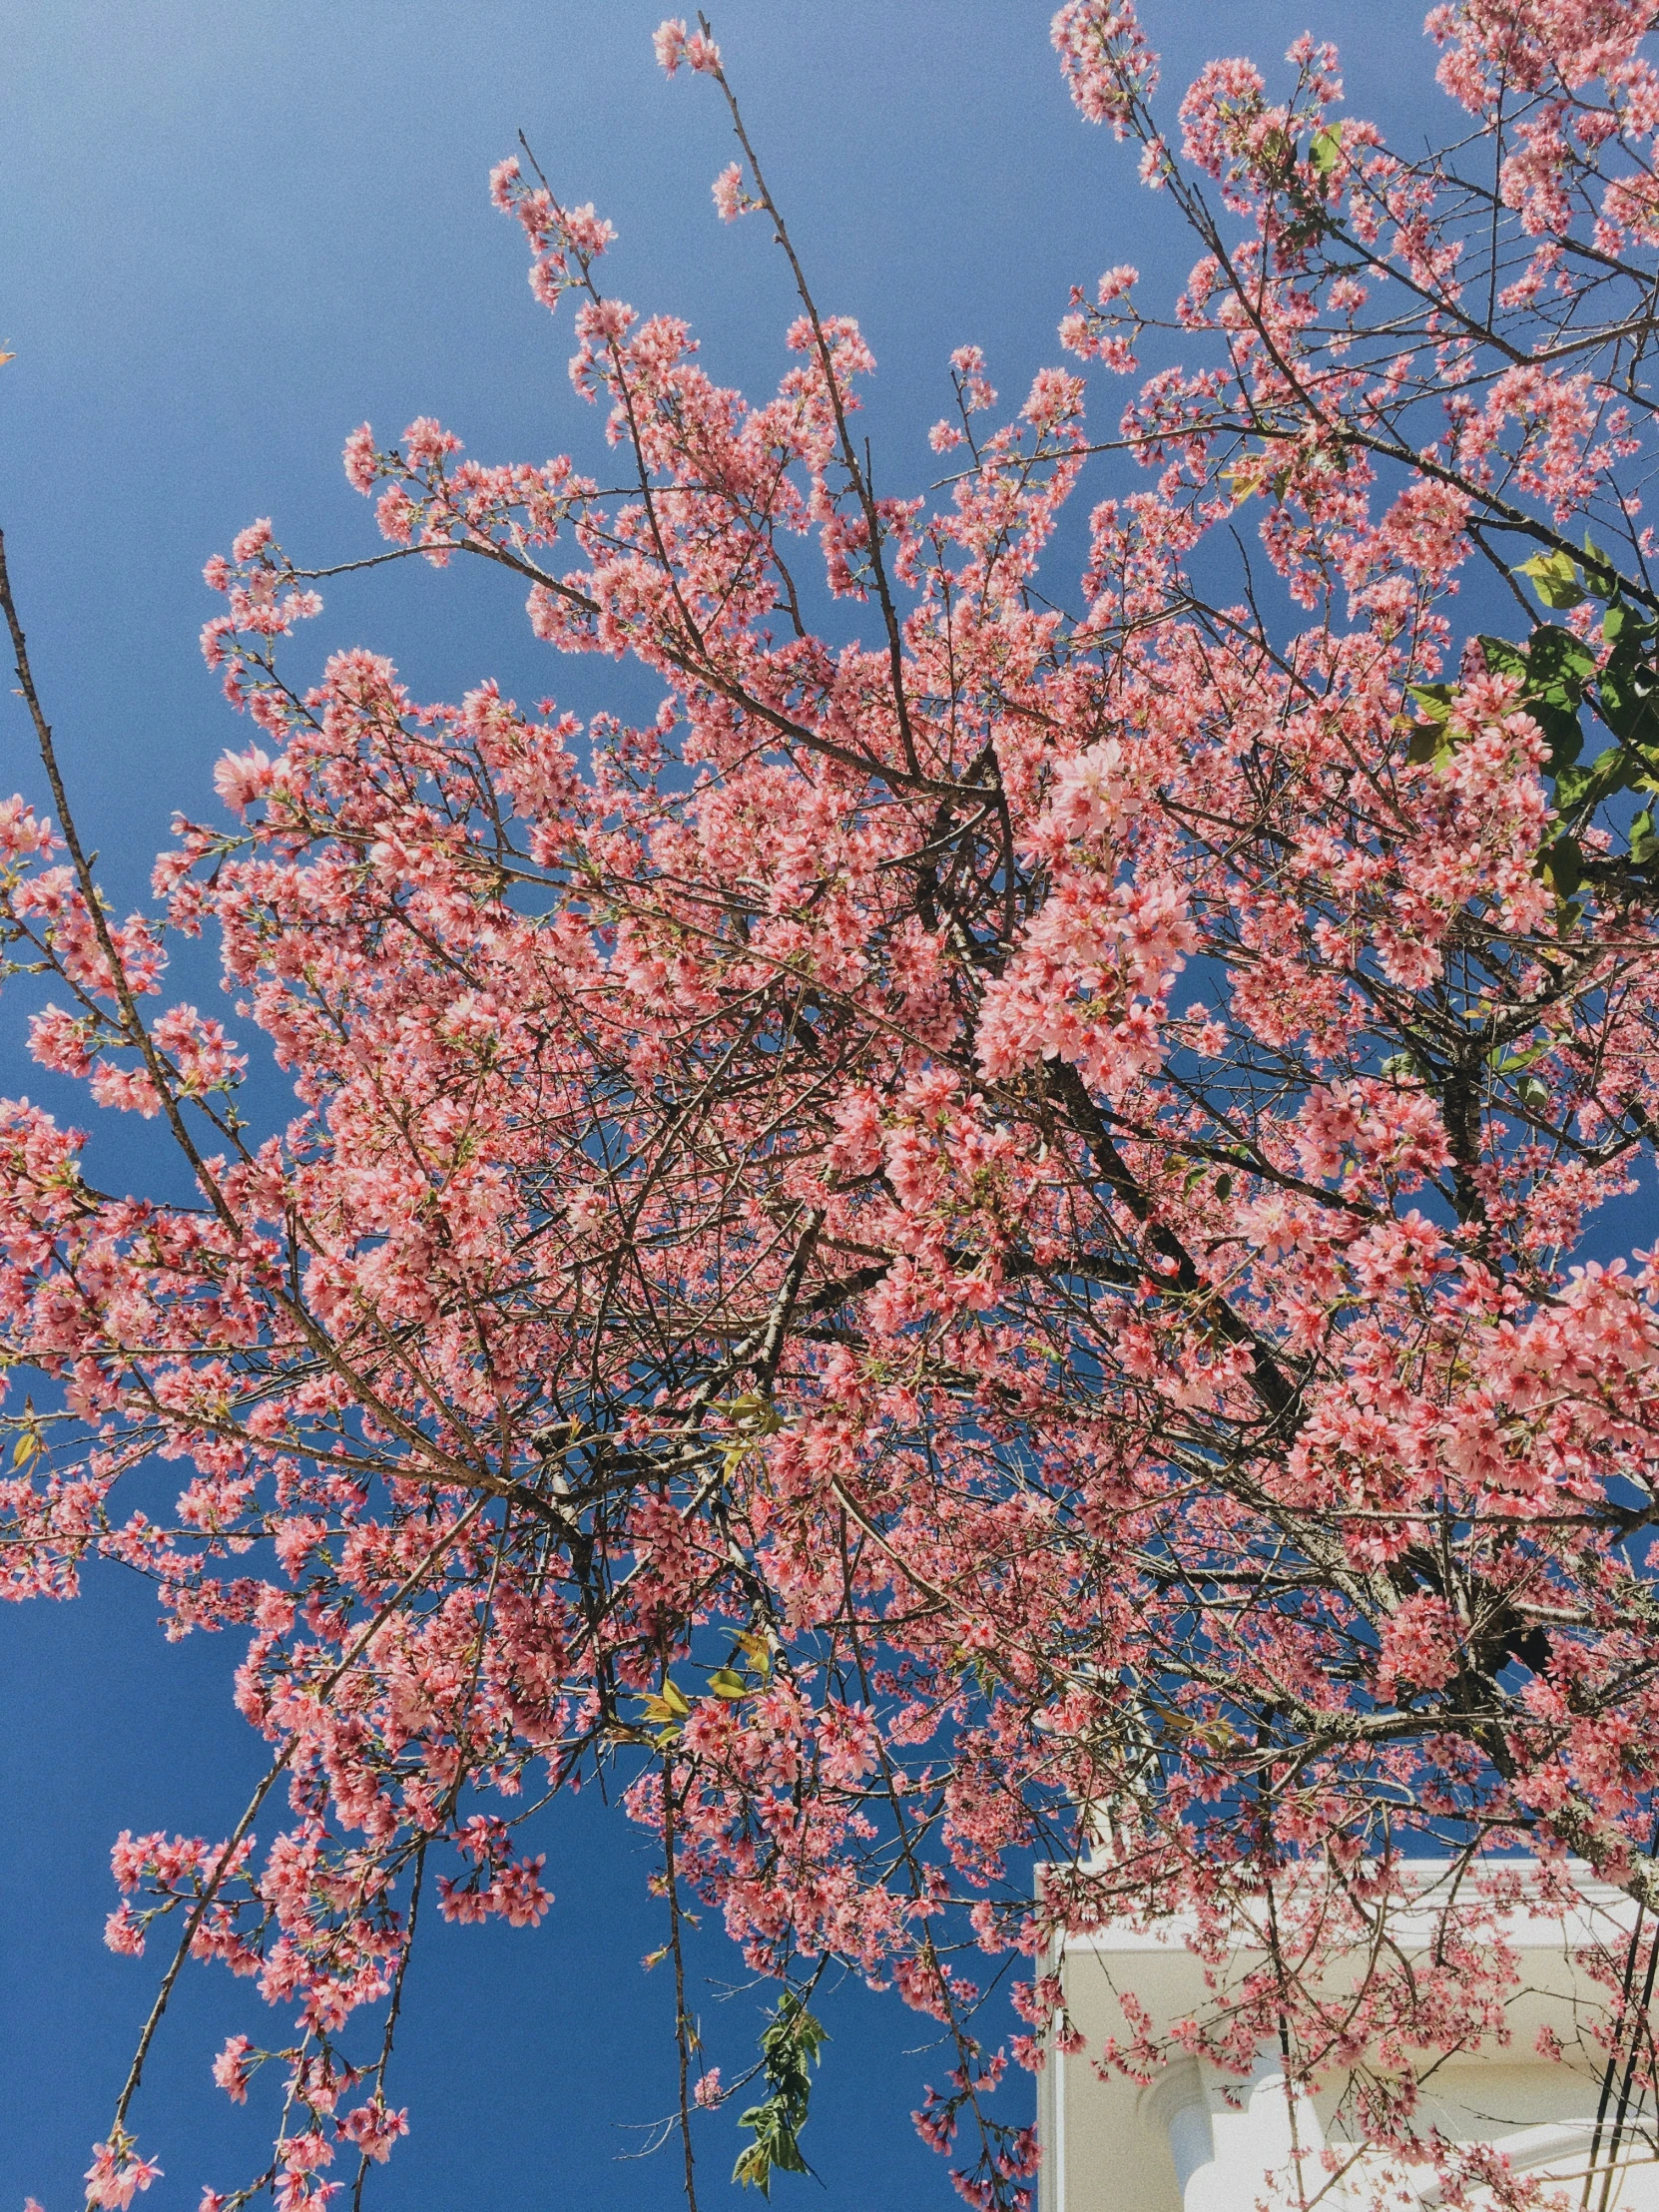 pink flowers on tree nch against clear blue sky